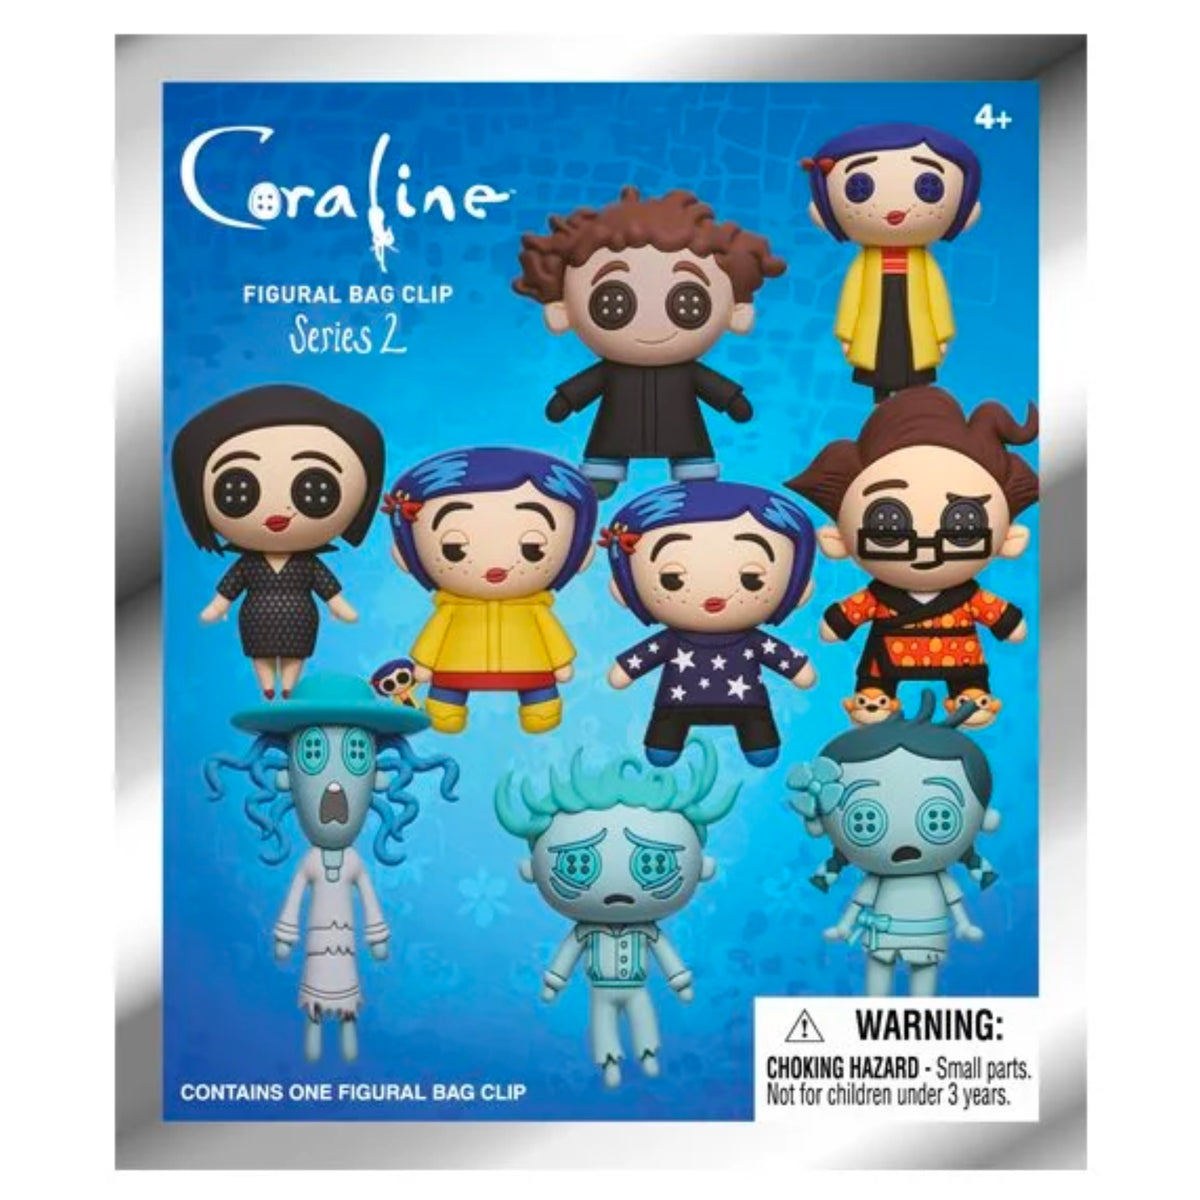 Coraline 3D Mystery Bag Clip Series 2